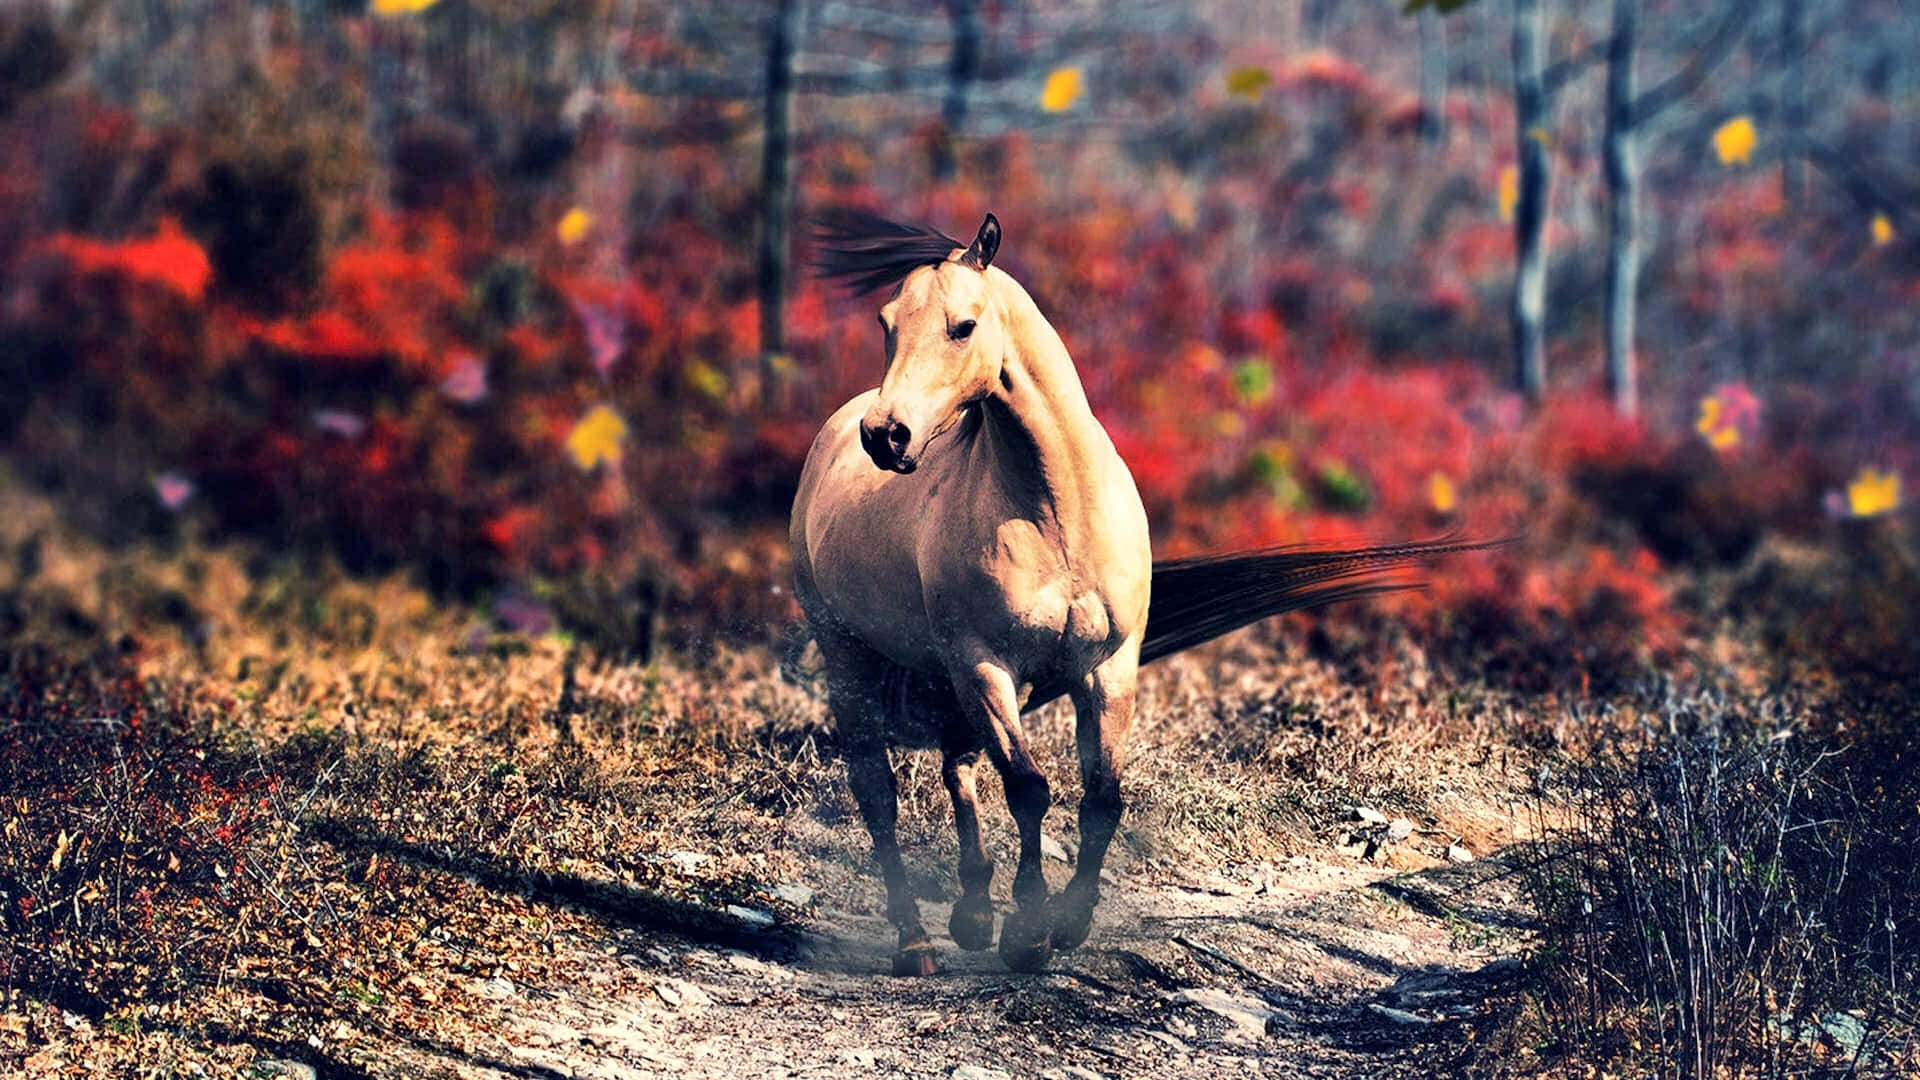 Beautiful Horse Lost On The Path Picture